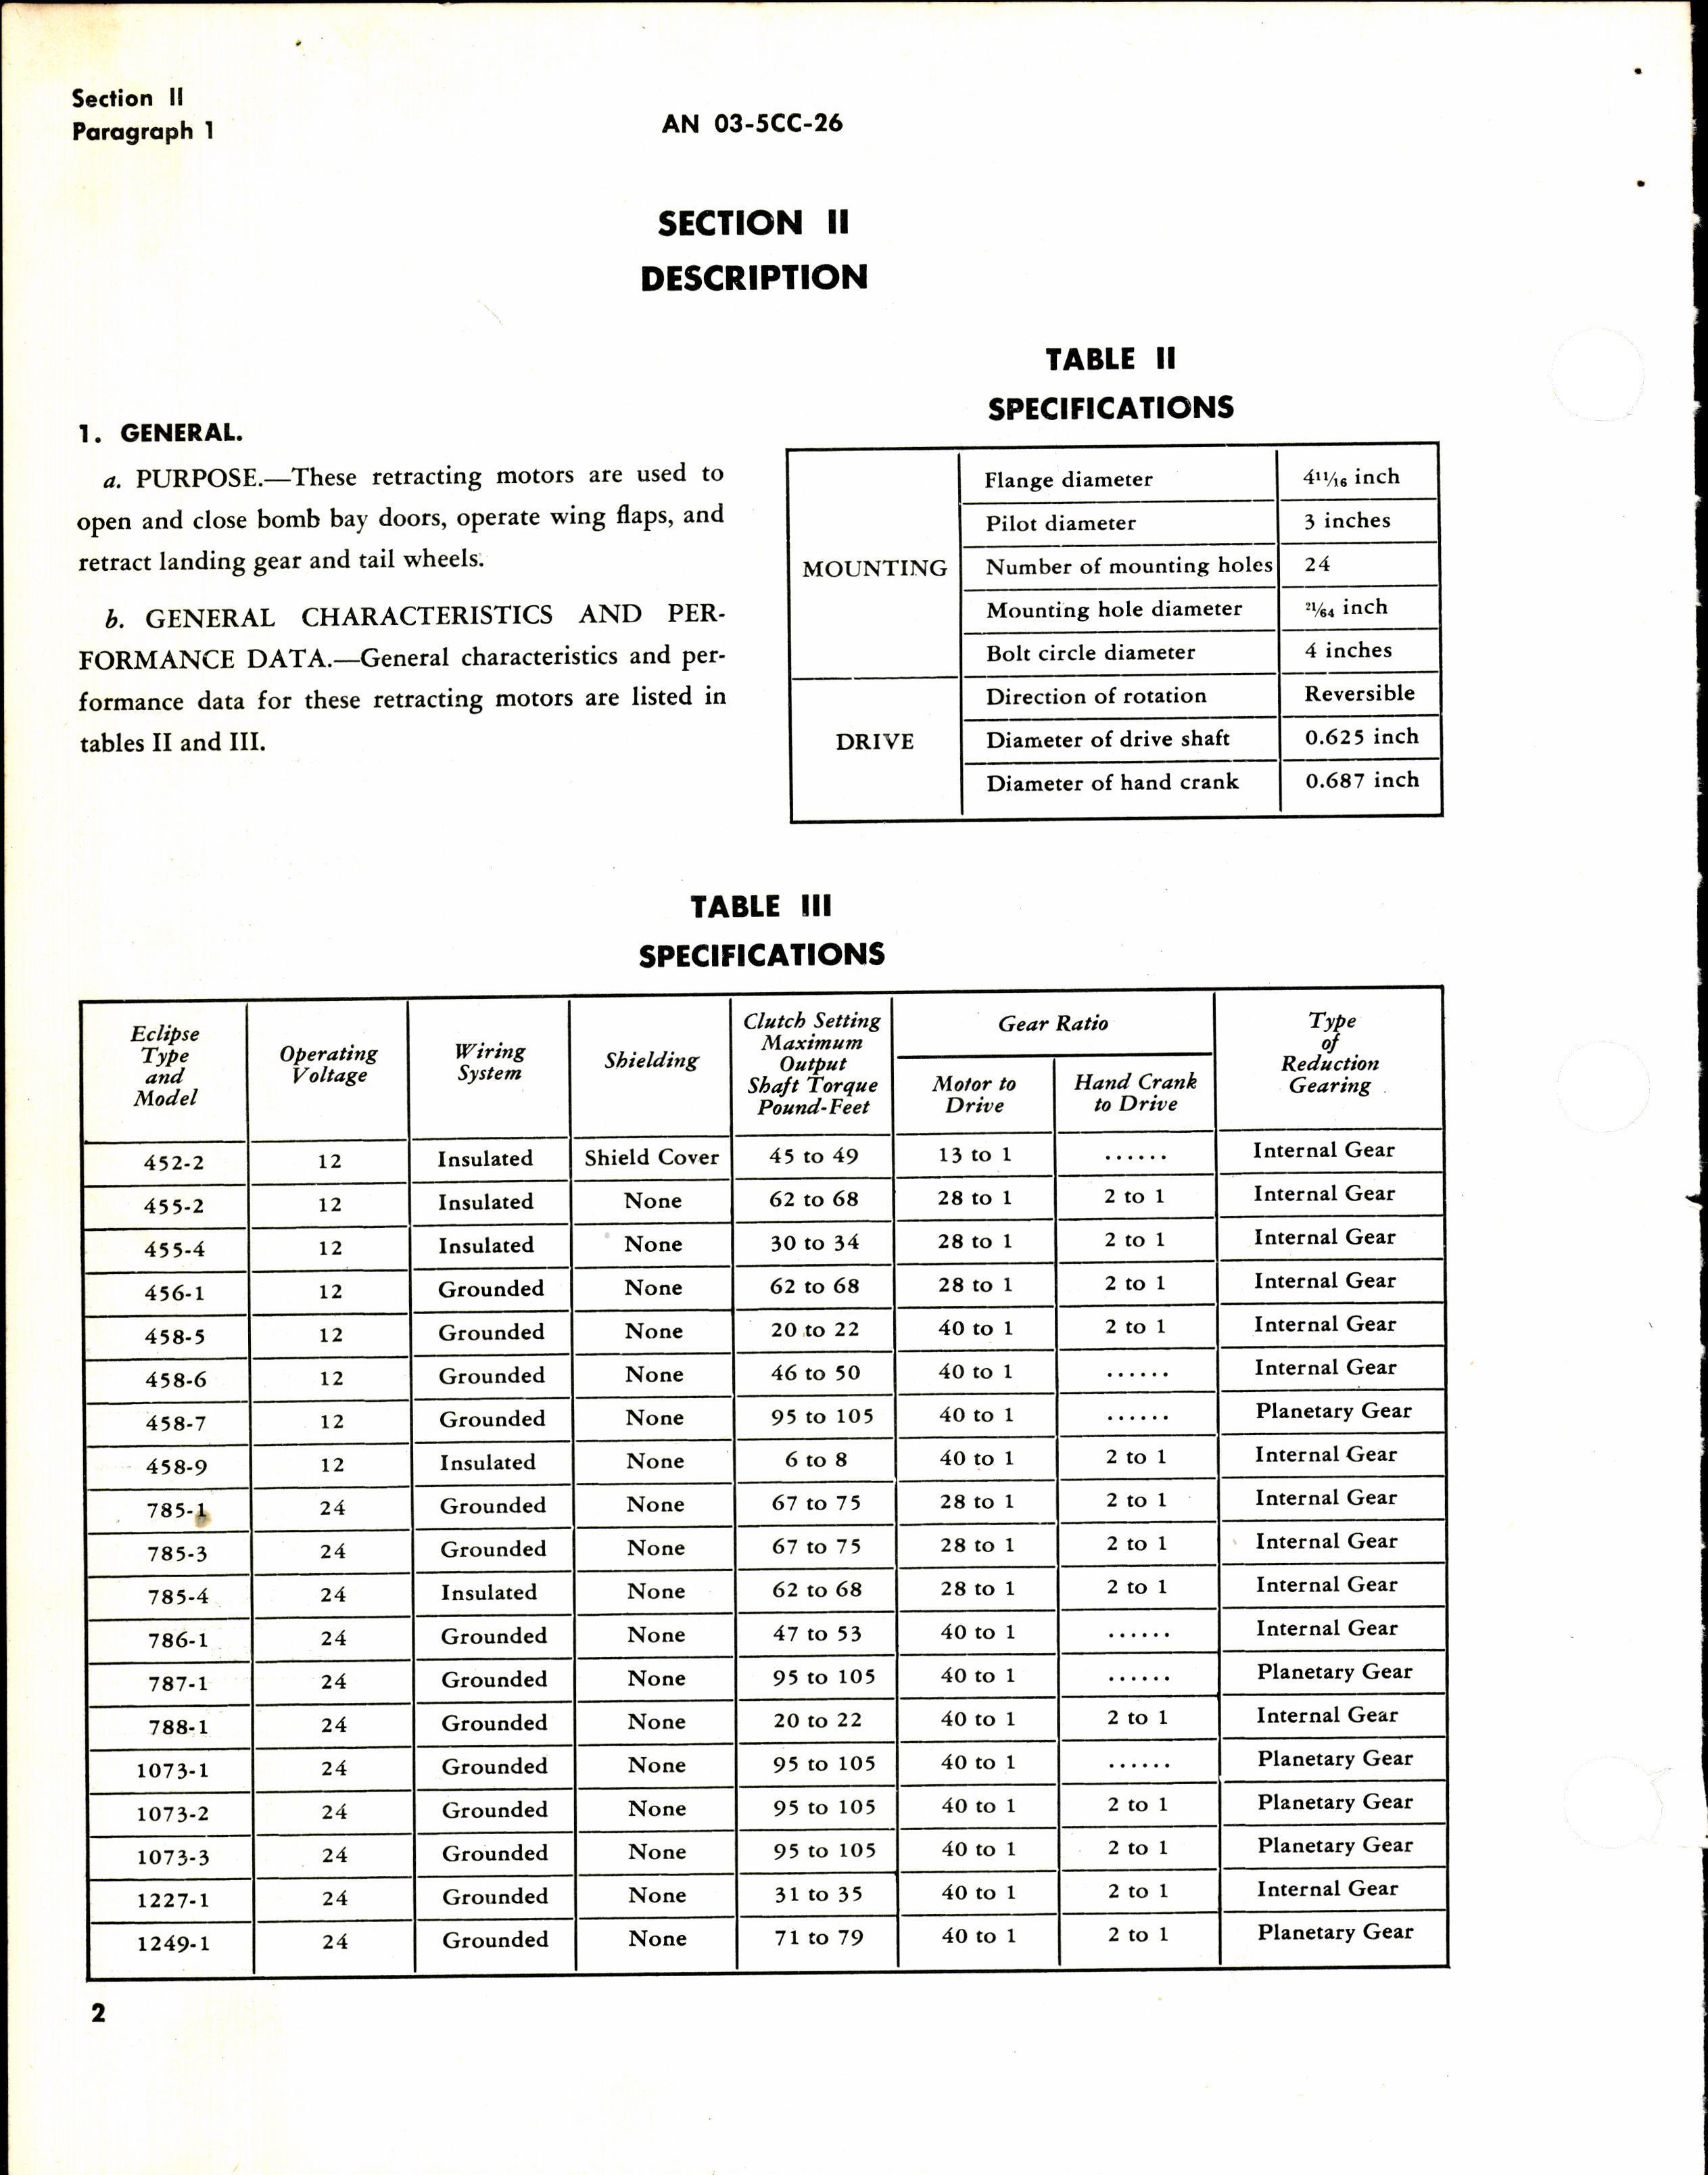 Sample page 8 from AirCorps Library document: Operation, Service, & Overhaul Instructions with Parts Catalog for Eclipse Retracting Motors